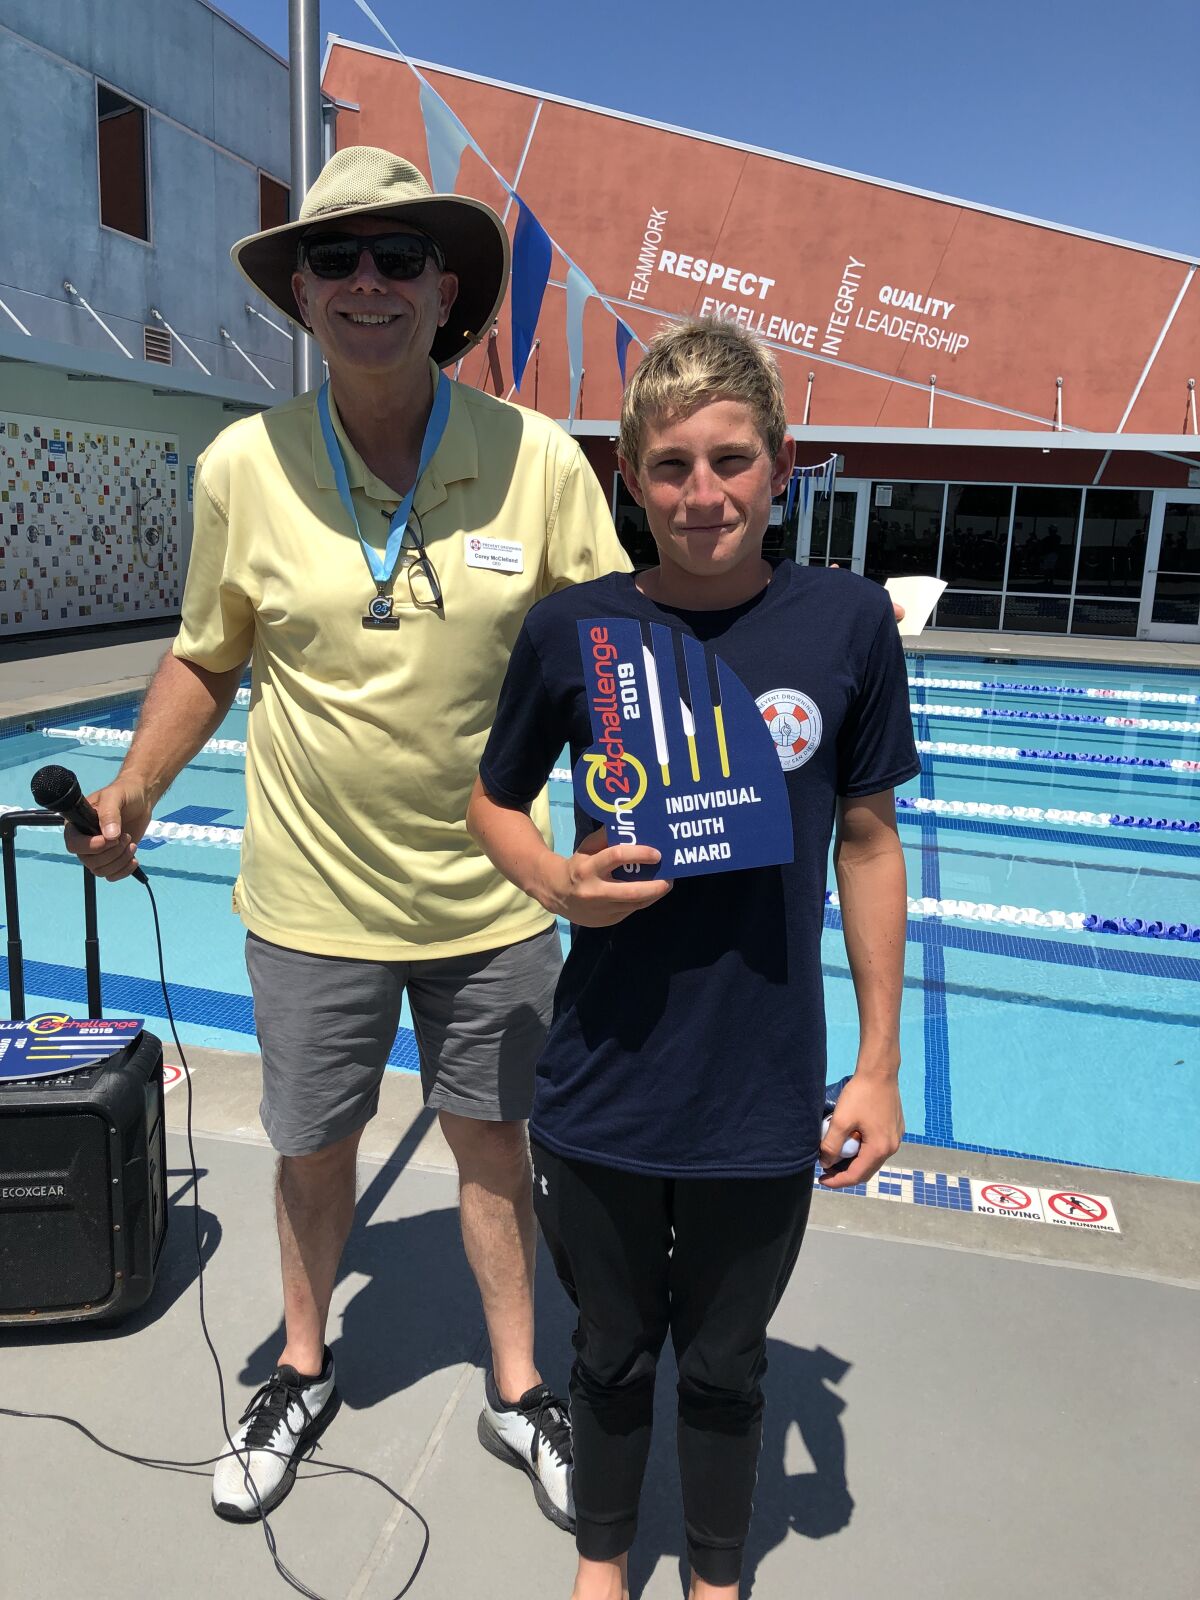 Corey McClelland, president and CEO at Prevent Drowning Foundation presents the top youth award to Rancho San Dieguito swimmer Sébastien Wenger.